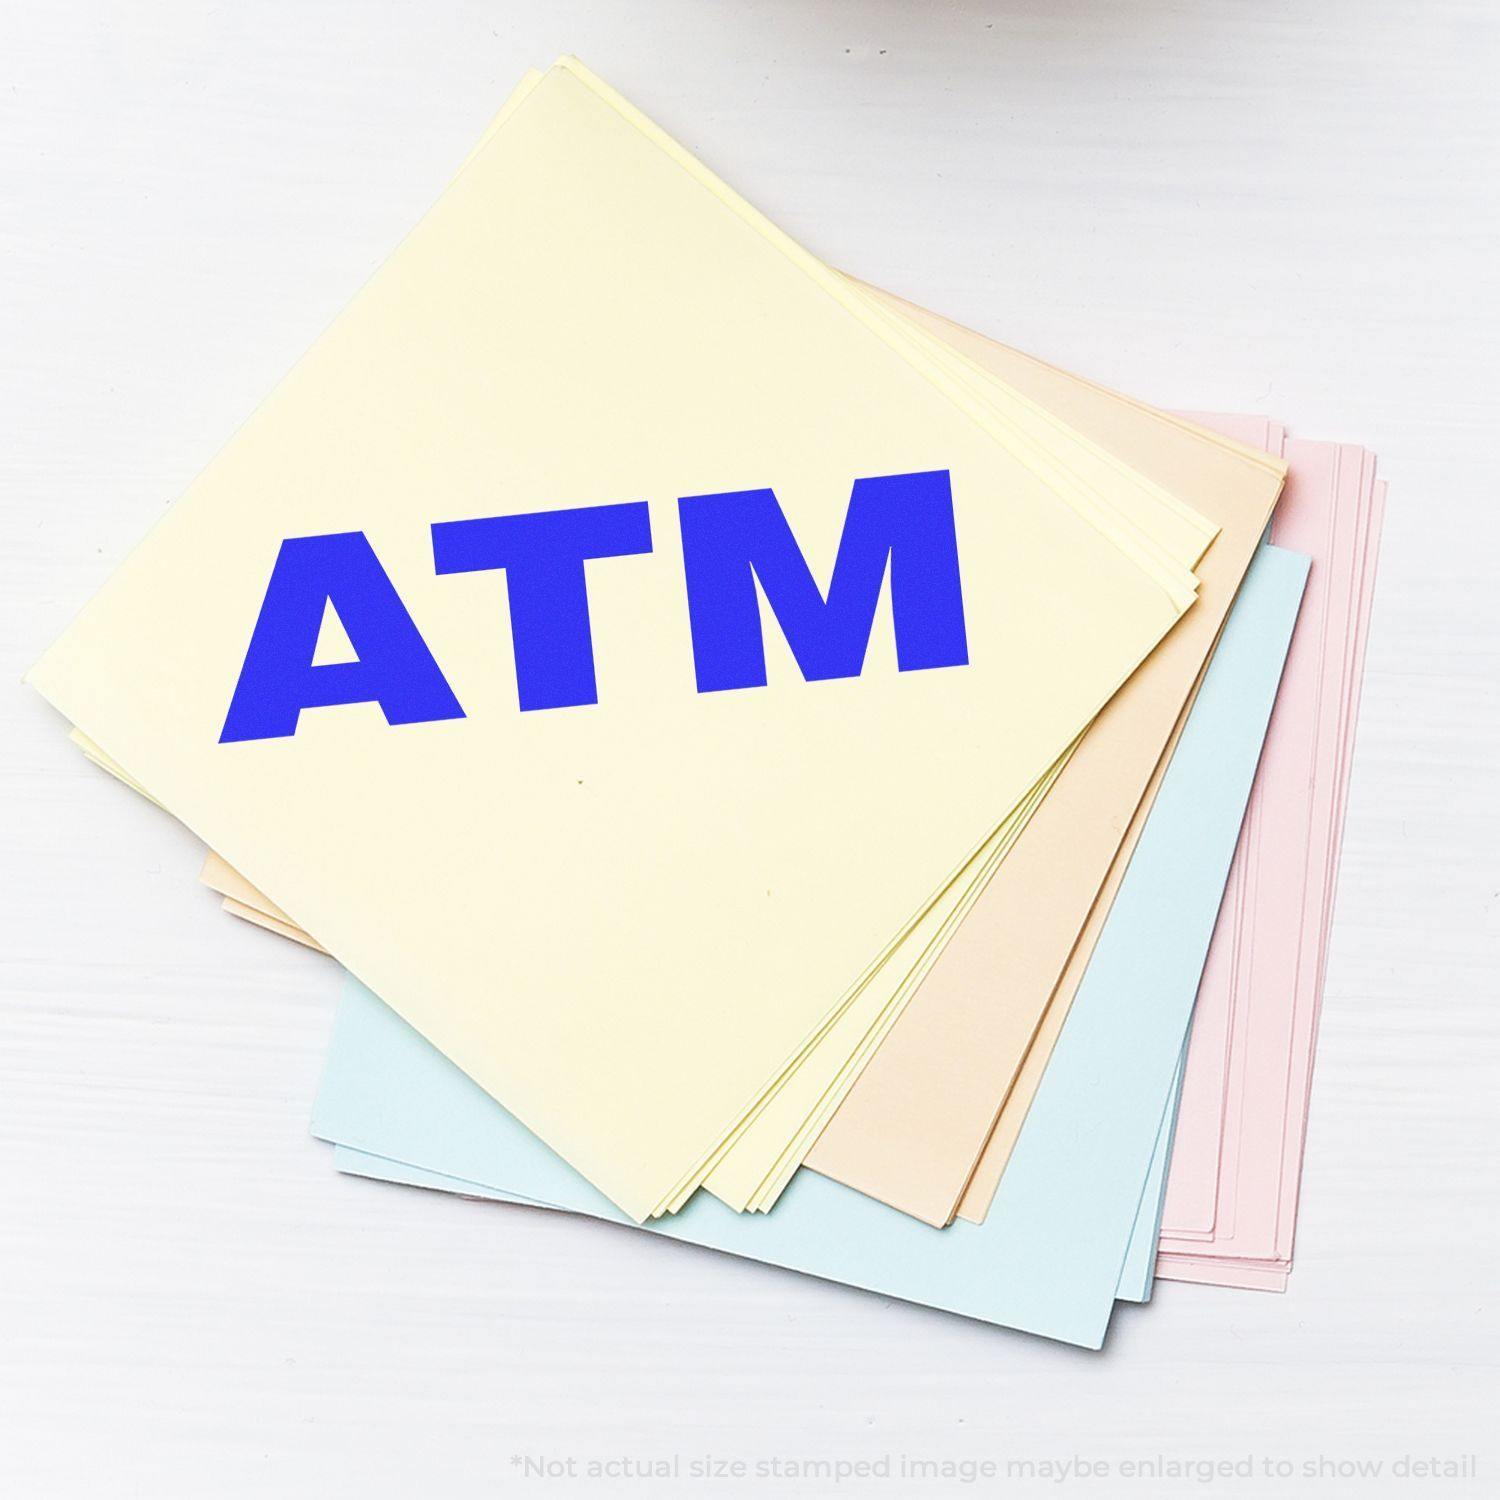 A self-inking stamp with a stamped image showing how the text "ATM" is displayed after stamping.